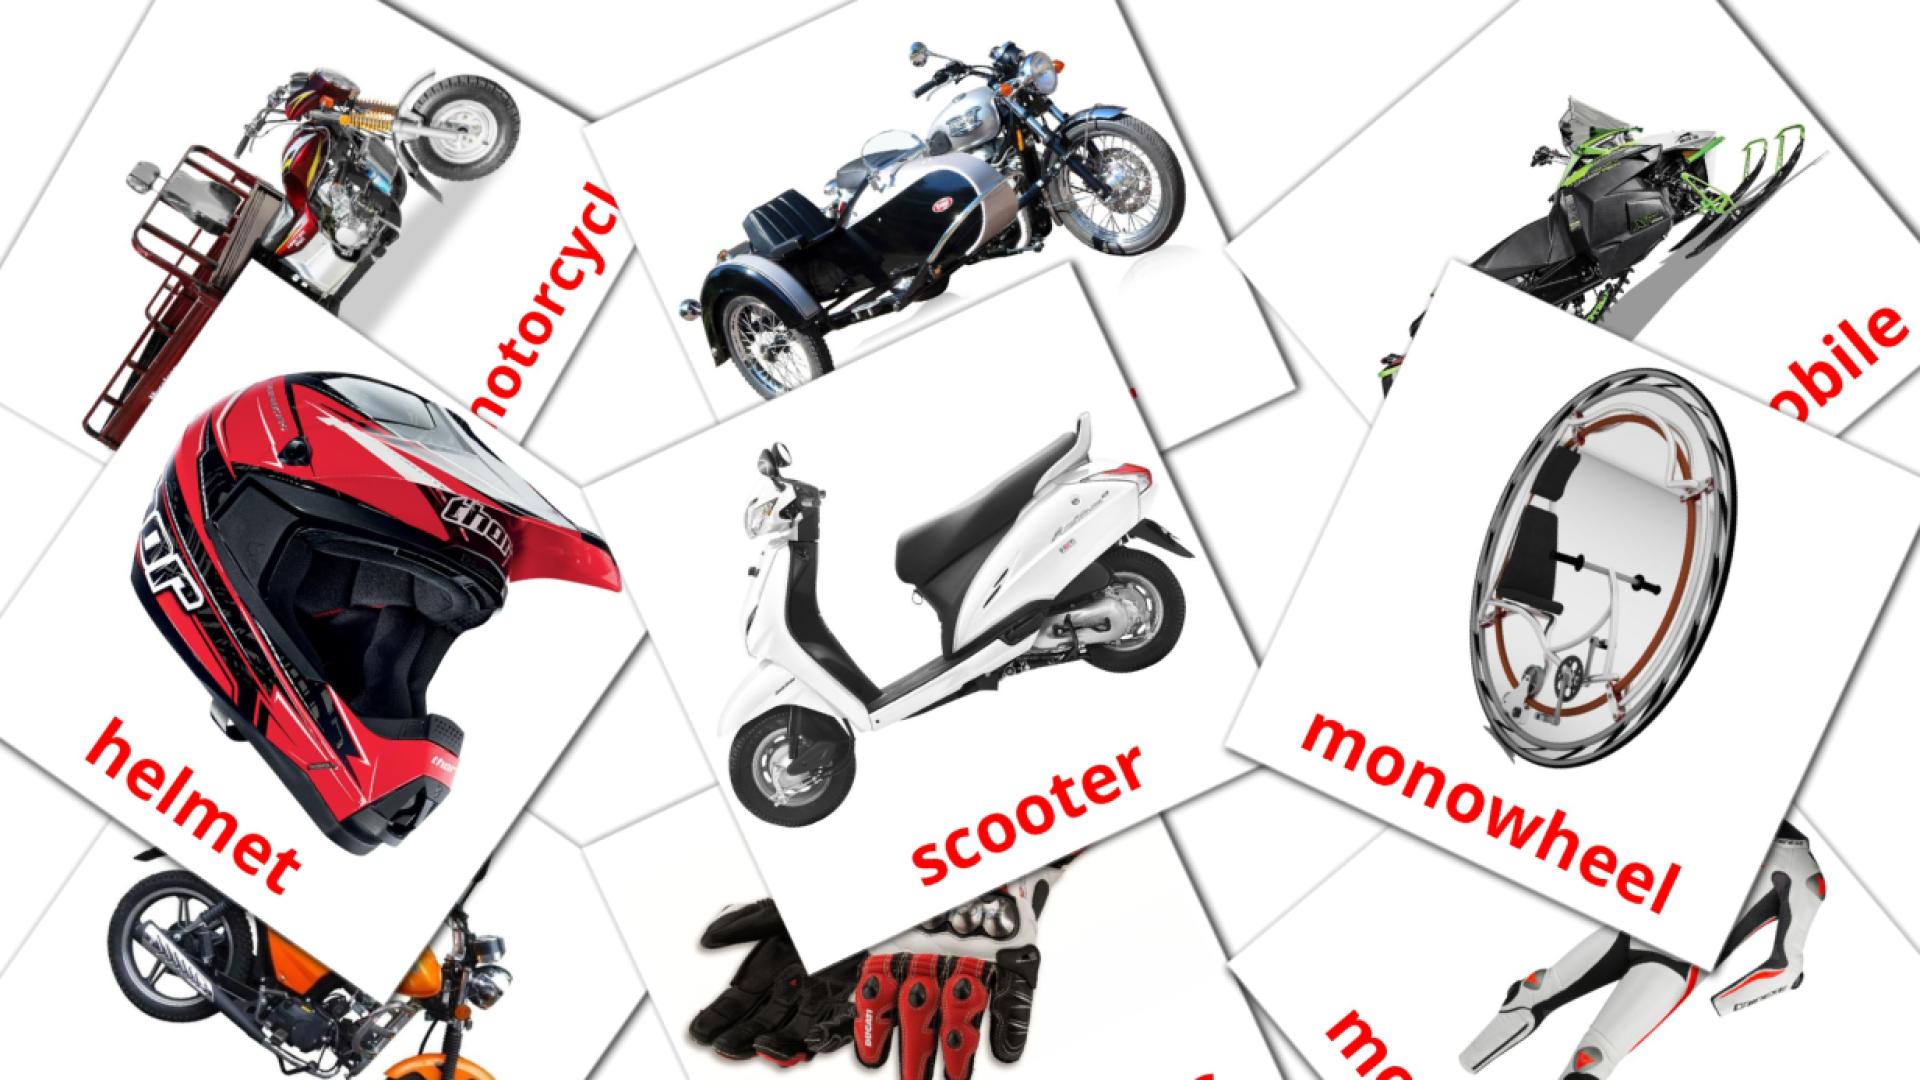 14 Motorcycles flashcards